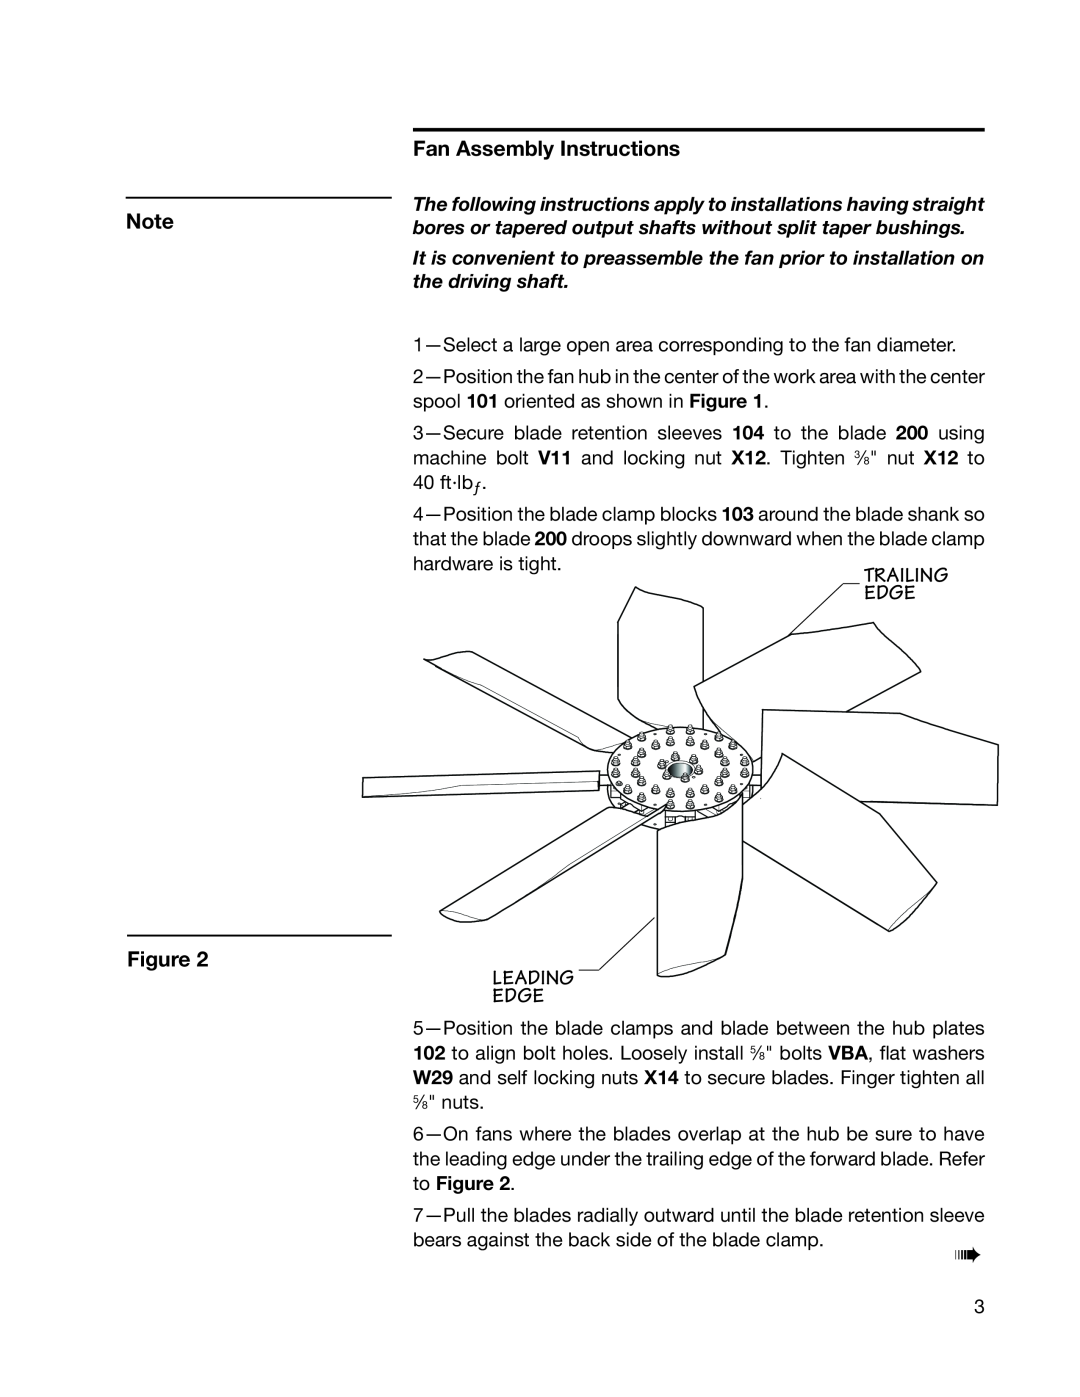 SPX Cooling Technologies 03-11A user manual Fan Assembly Instructions, Trailing, Leading Edge 